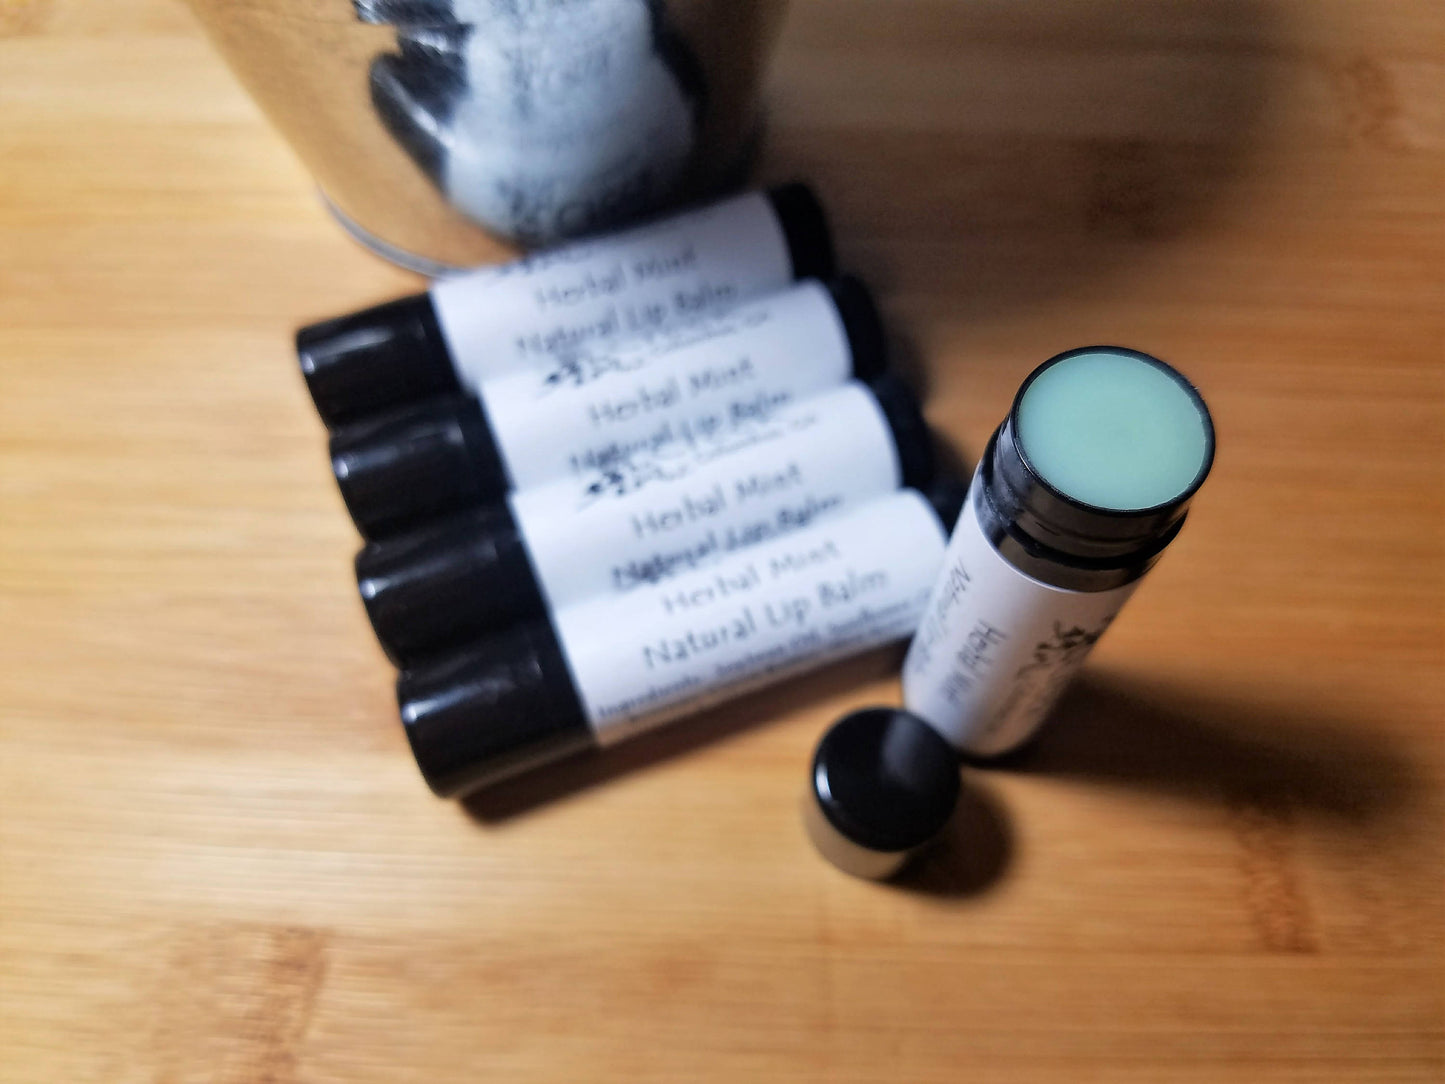 Ivy Creek Herbal Mint Natural Lip Balm - Holistic Lip Care - Chapstick - All Natural Ingredients